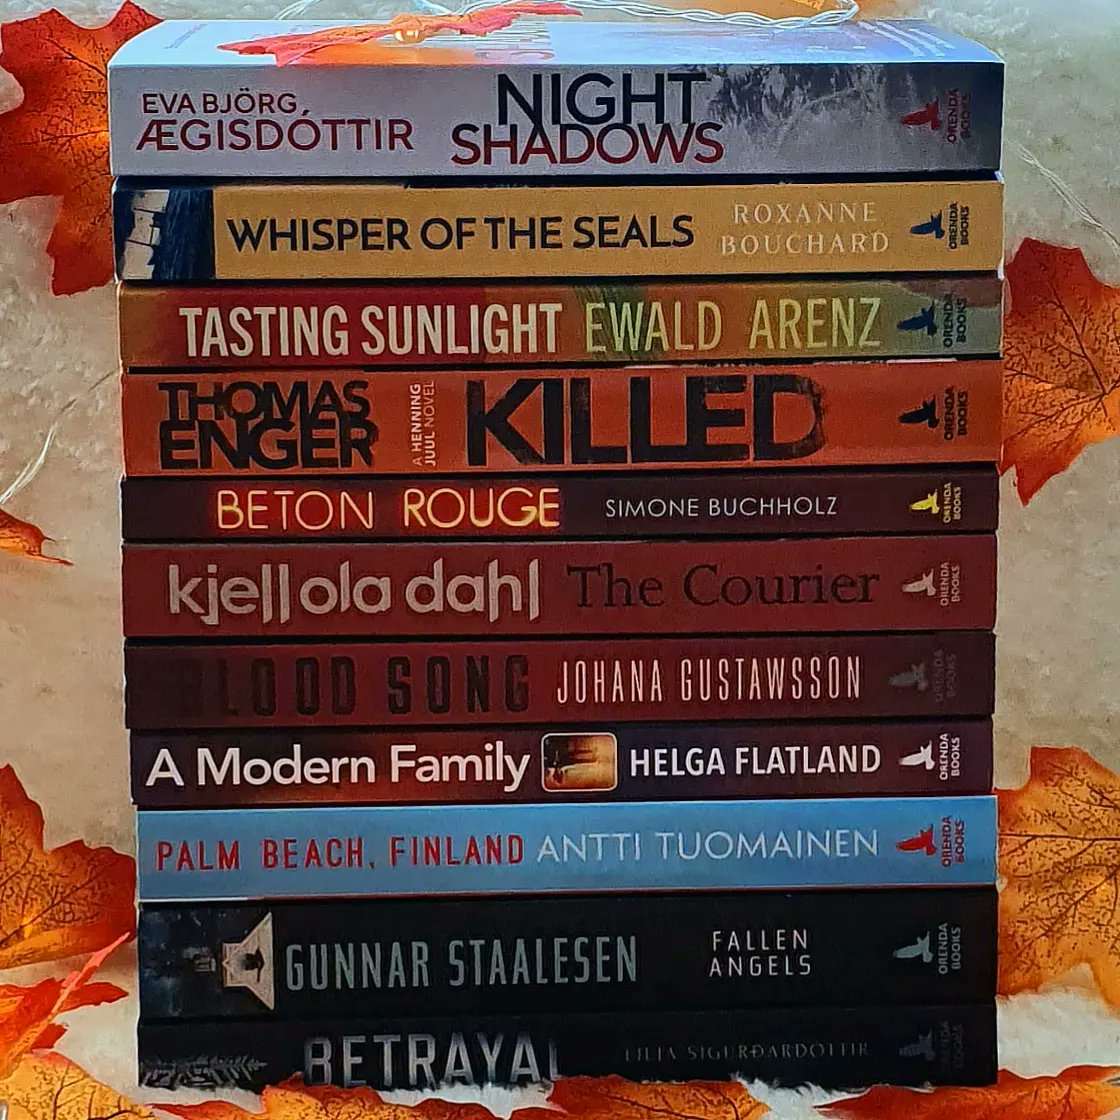 Day 28 of the #Orentober photo challenge: a translator appreciation stack. @OrendaBooks have a huge selection of translated fiction and I couldn't be more grateful for the extremely talented translators who allow me to enjoy books from all over the world! instagram.com/p/CkQBYQELtpy/…